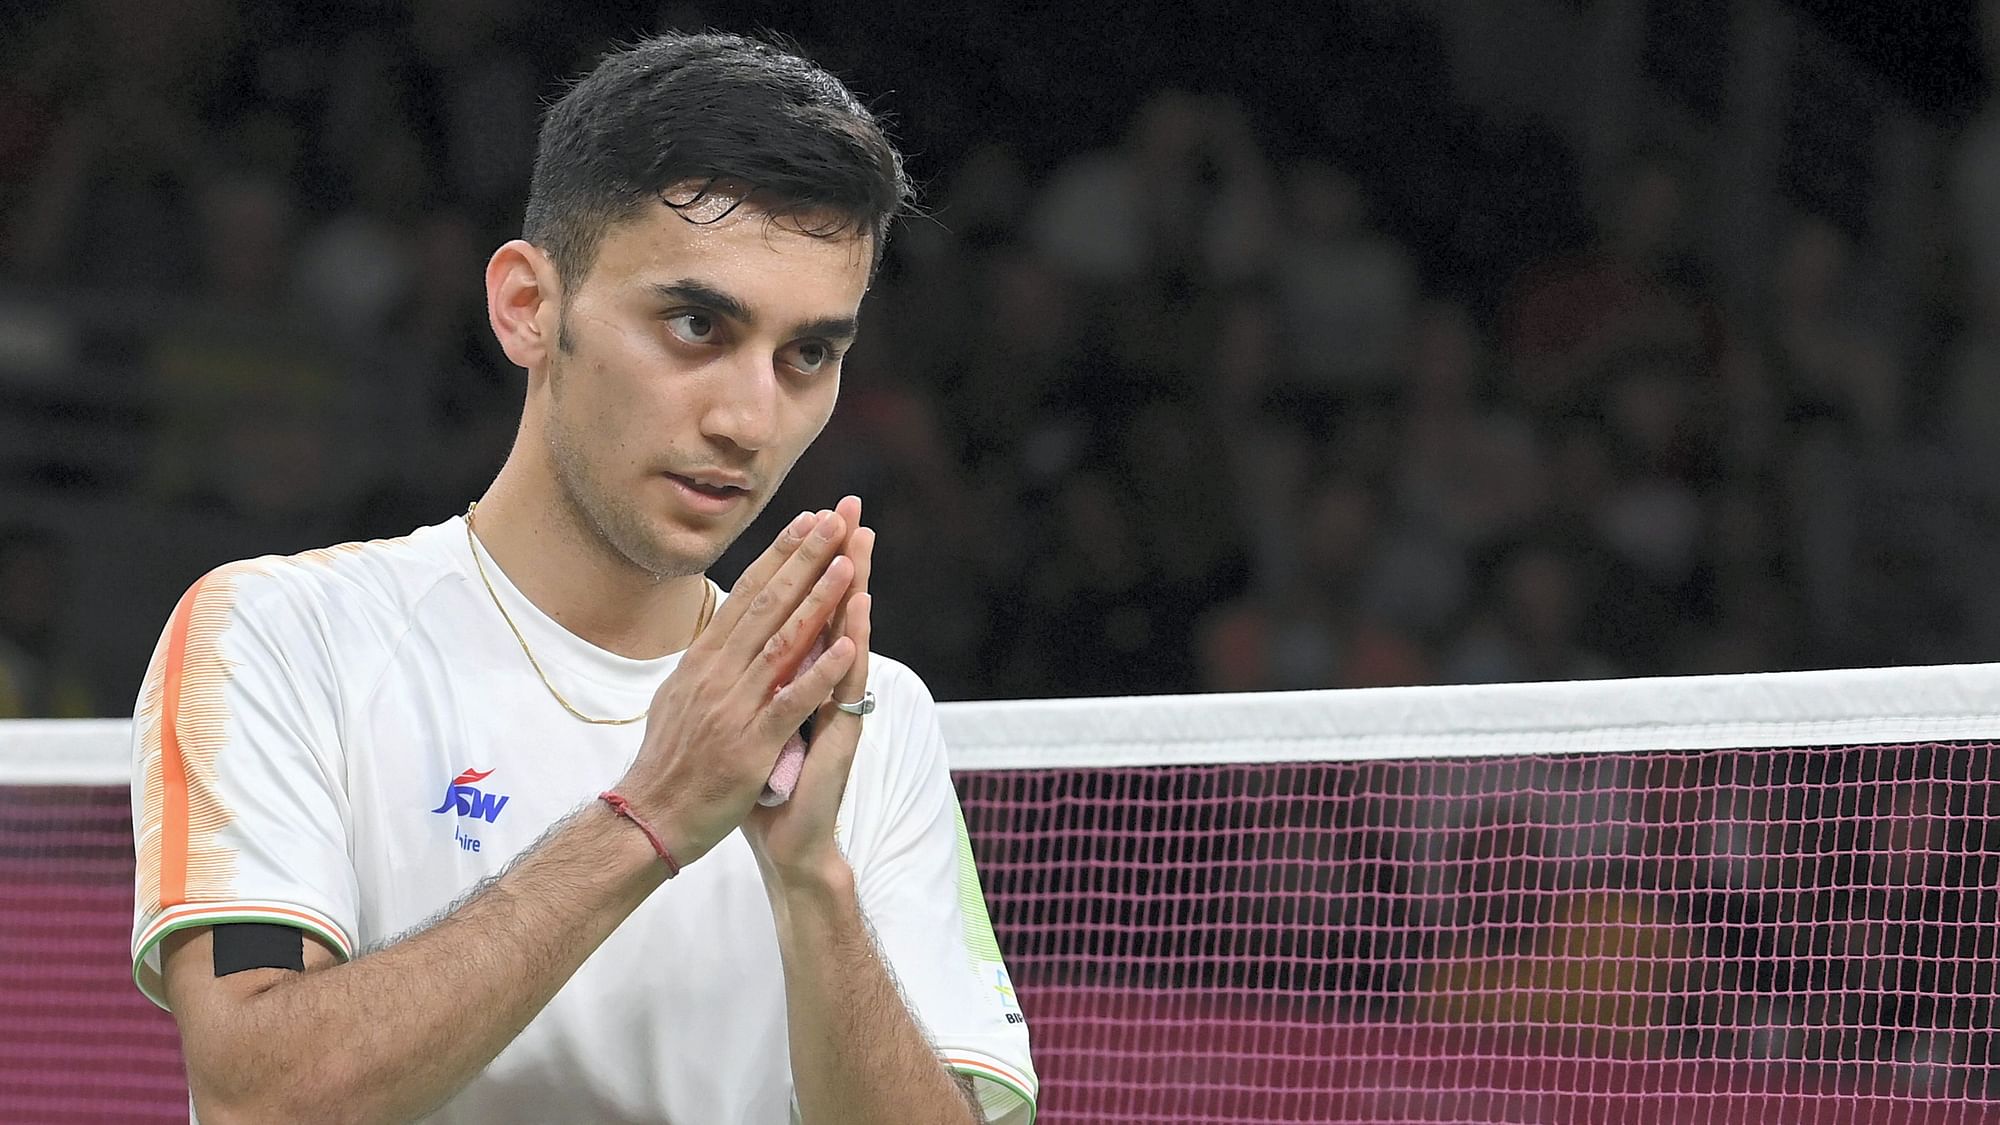 <div class="paragraphs"><p>India's Lakshya Sen celebrates after winning against Singapore's Jia Min Yeo during the badminton mixed team semi-final at the 2022 Commonwealth Games in Birmingham.&nbsp;</p></div>